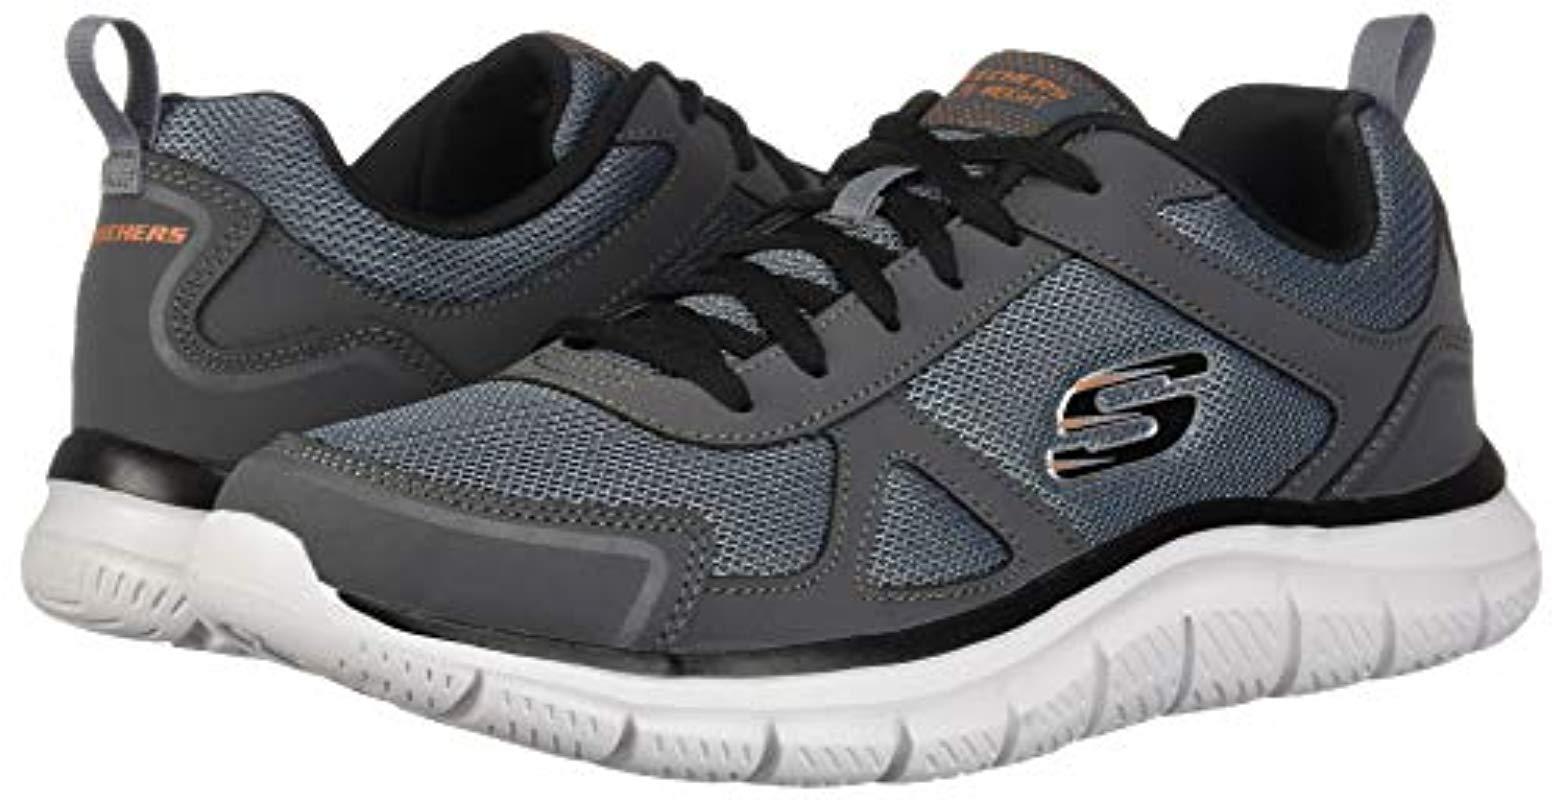 Skechers Track Scloric Oxford in Charcoal/Black (Black) - Lyst